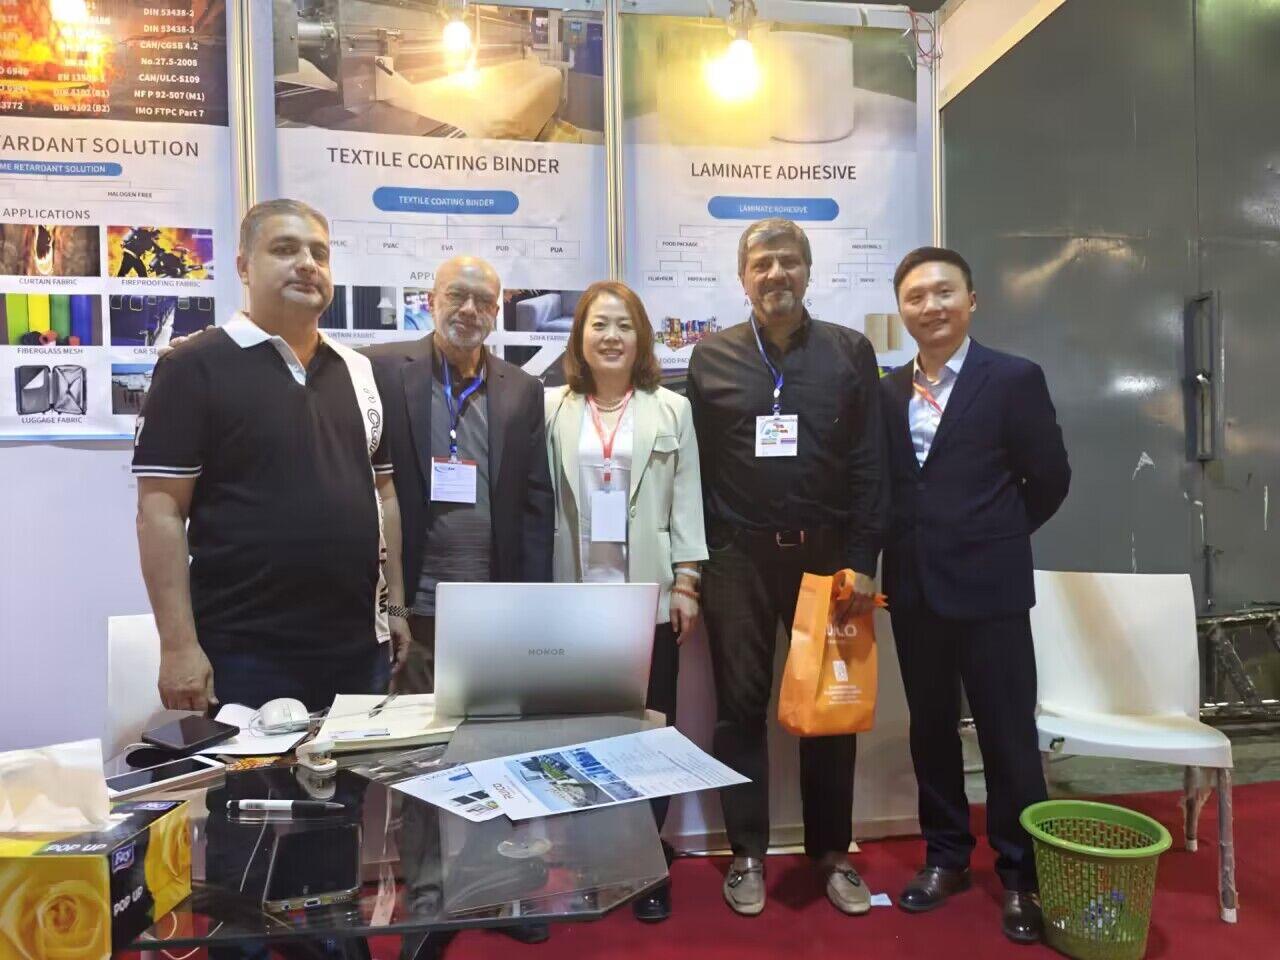 Zhejiang Ruico Advanced Materials Co., Ltd. participated in the 26th Asian Textile Exhibition